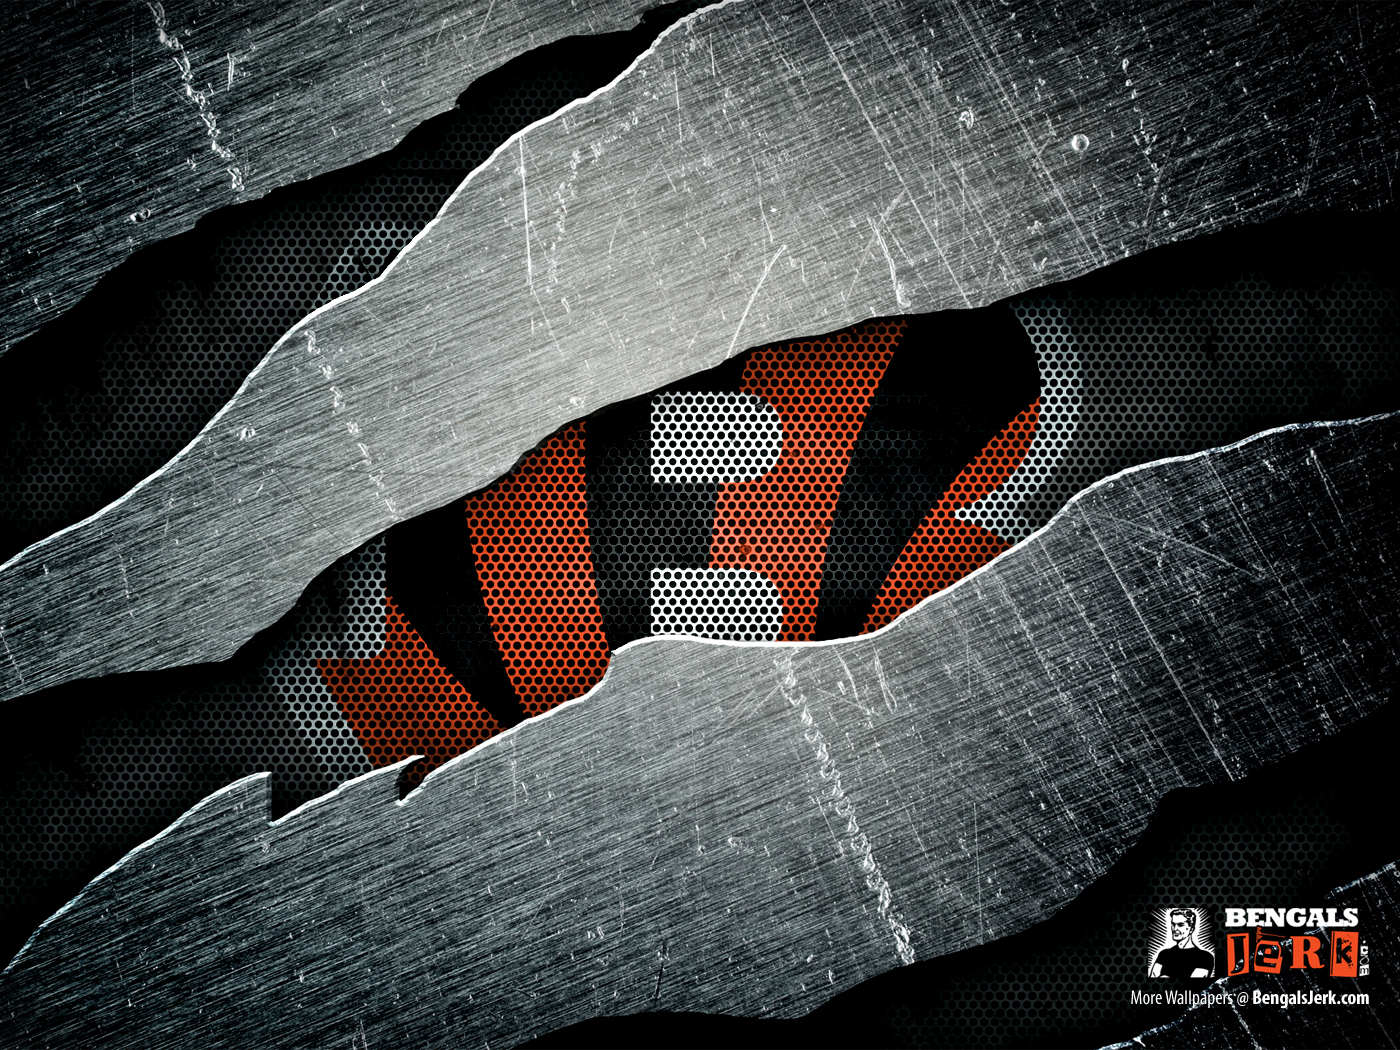 bengals wallpaper,design,pattern,photography,black and white,graphics